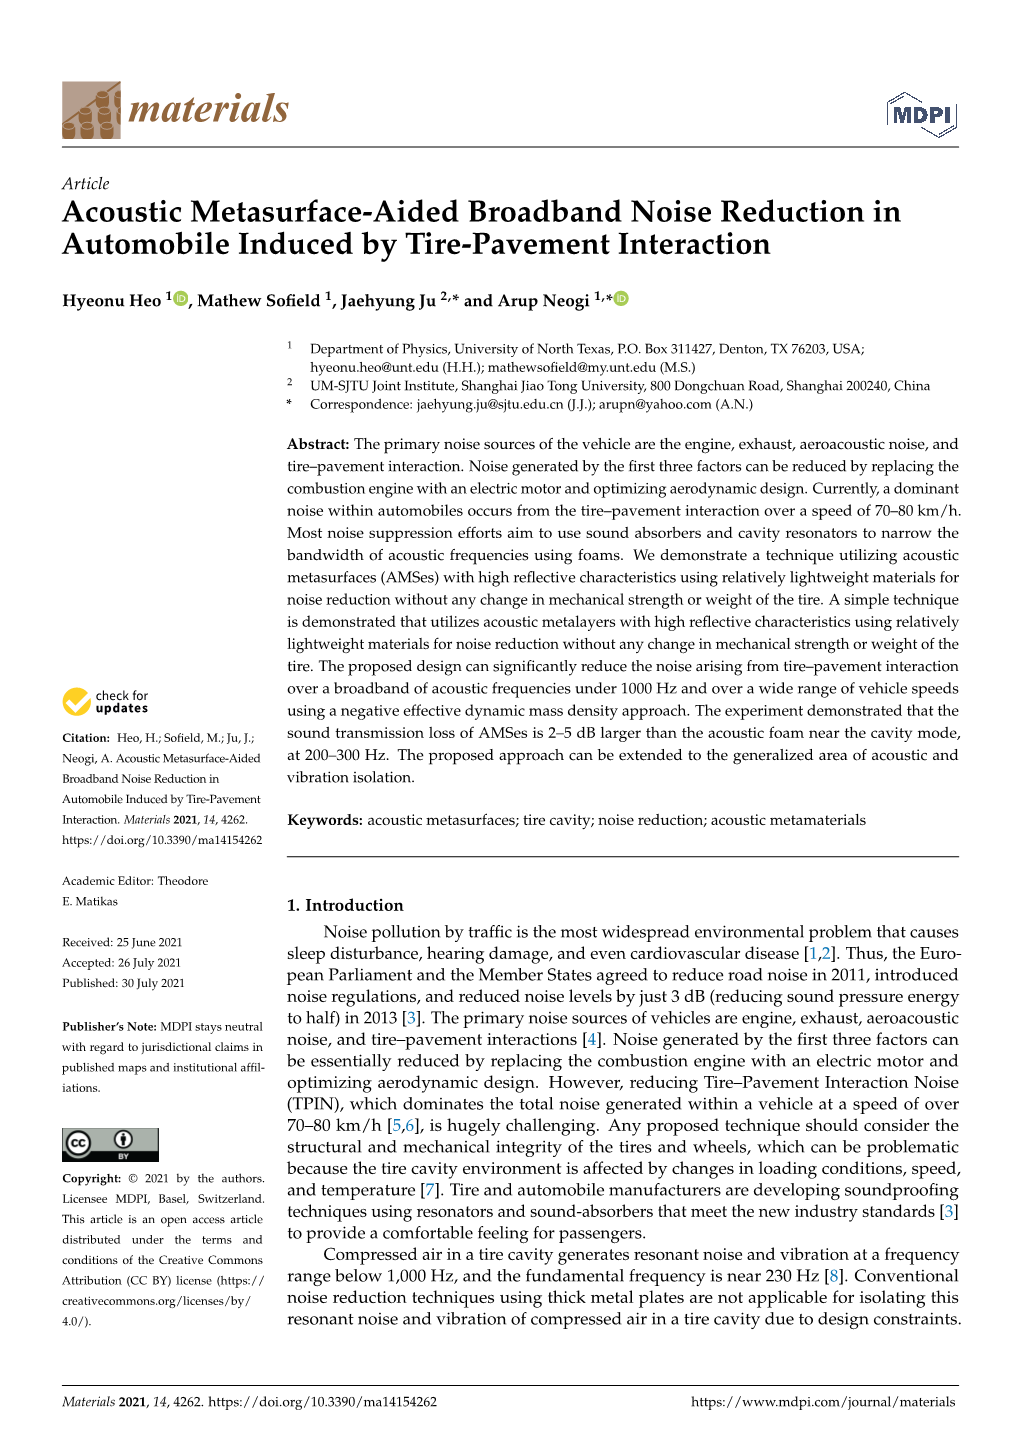 Acoustic Metasurface-Aided Broadband Noise Reduction in Automobile Induced by Tire-Pavement Interaction